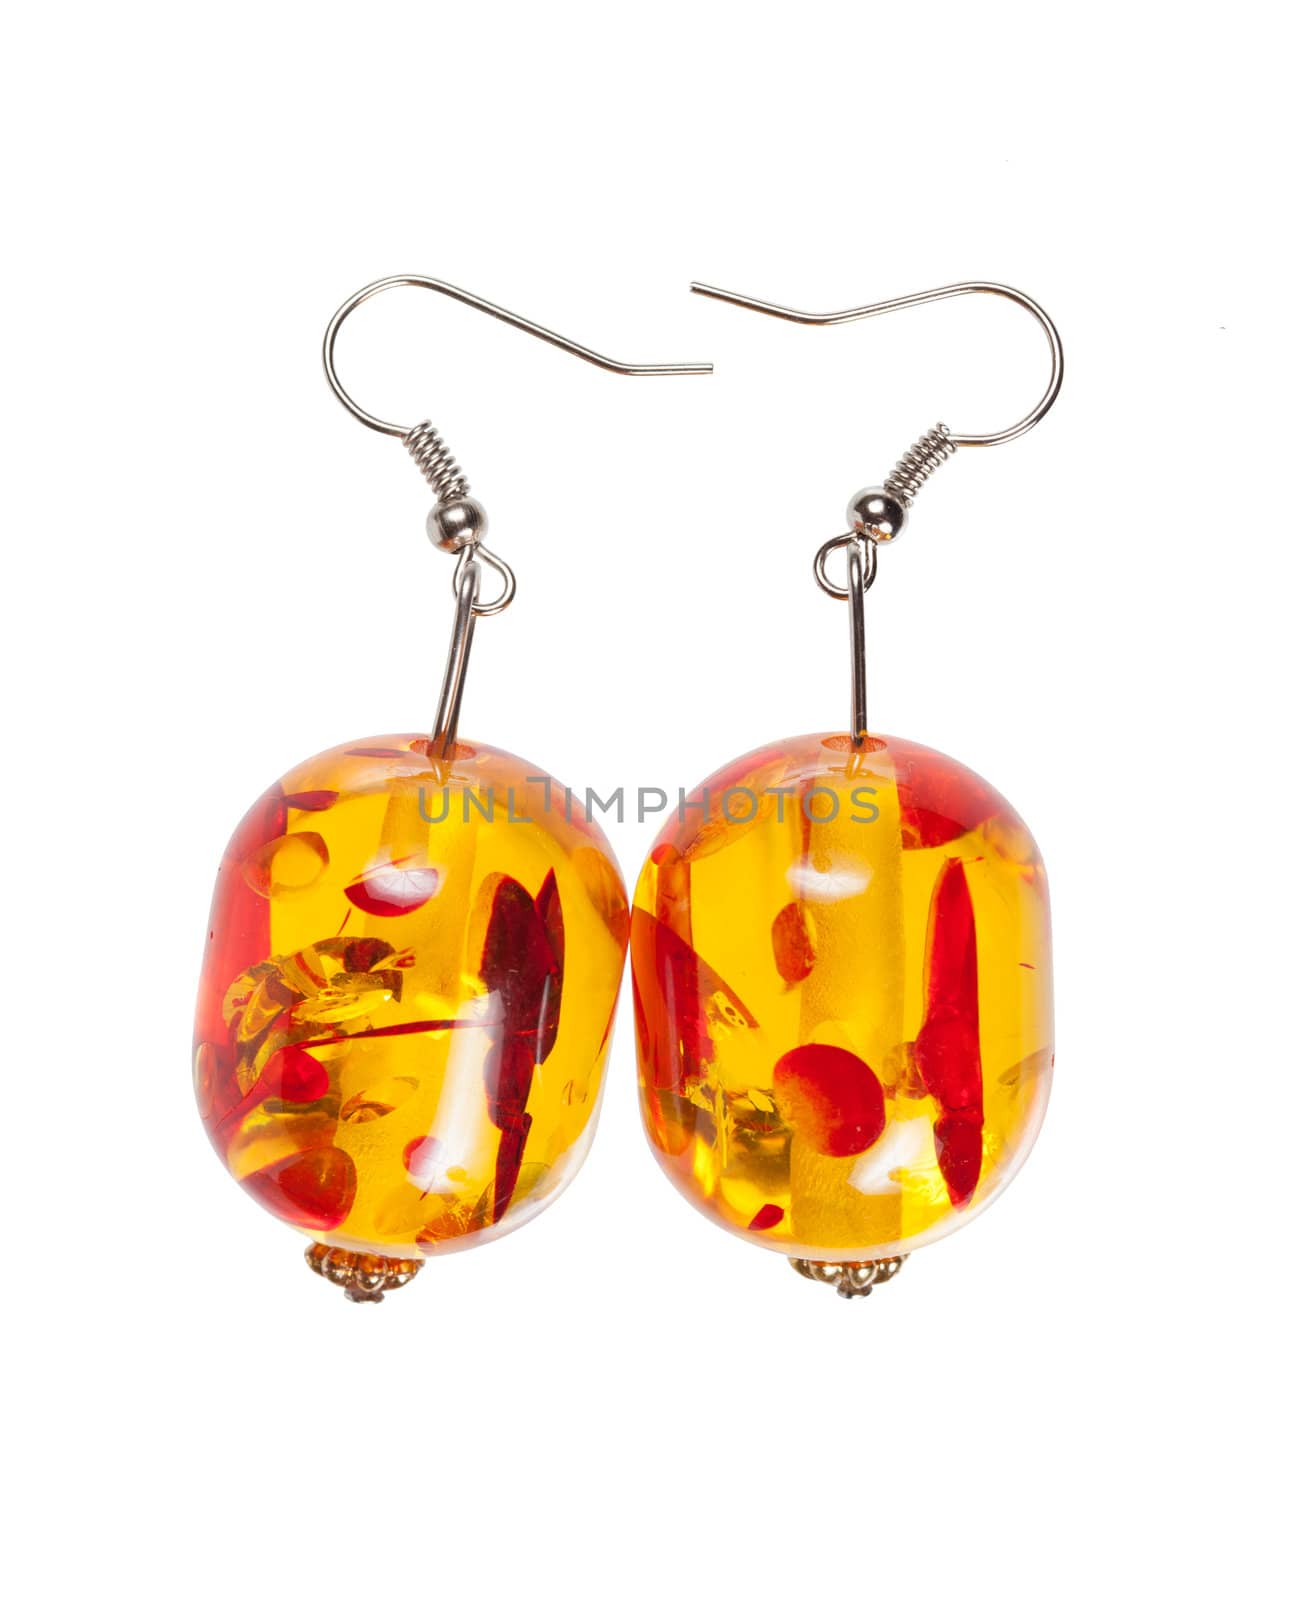 Earrings glass red-yellow color with an abstract pattern. Isolated on white background